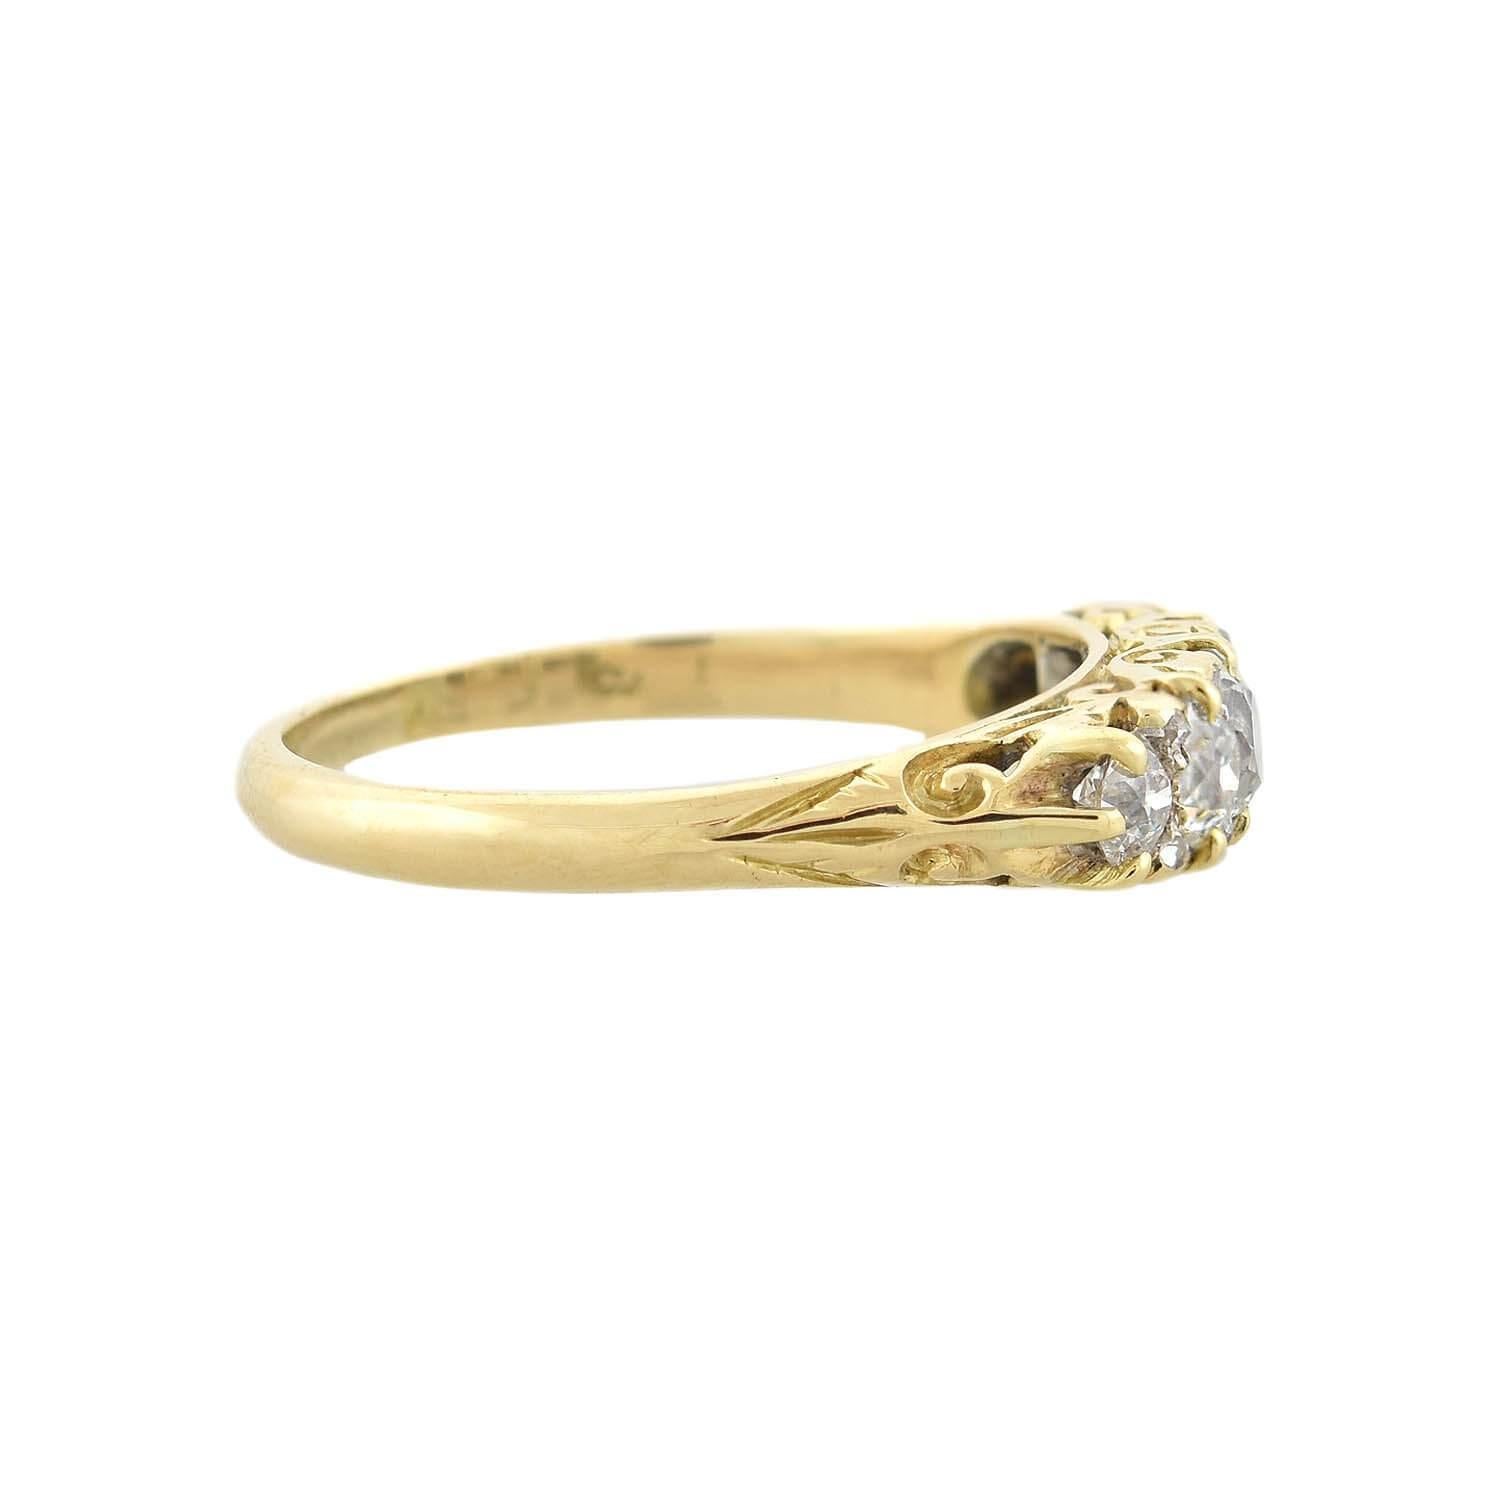 A gorgeous Edwardian (ca1910s) era diamond ring! Crafted in 18kt yellow gold, this stunning piece has a beautiful 5-stone design. Lining the face of the ring is a row of gently graduated old Mine Cut diamonds. Eight small Rose Cut diamonds adorn the